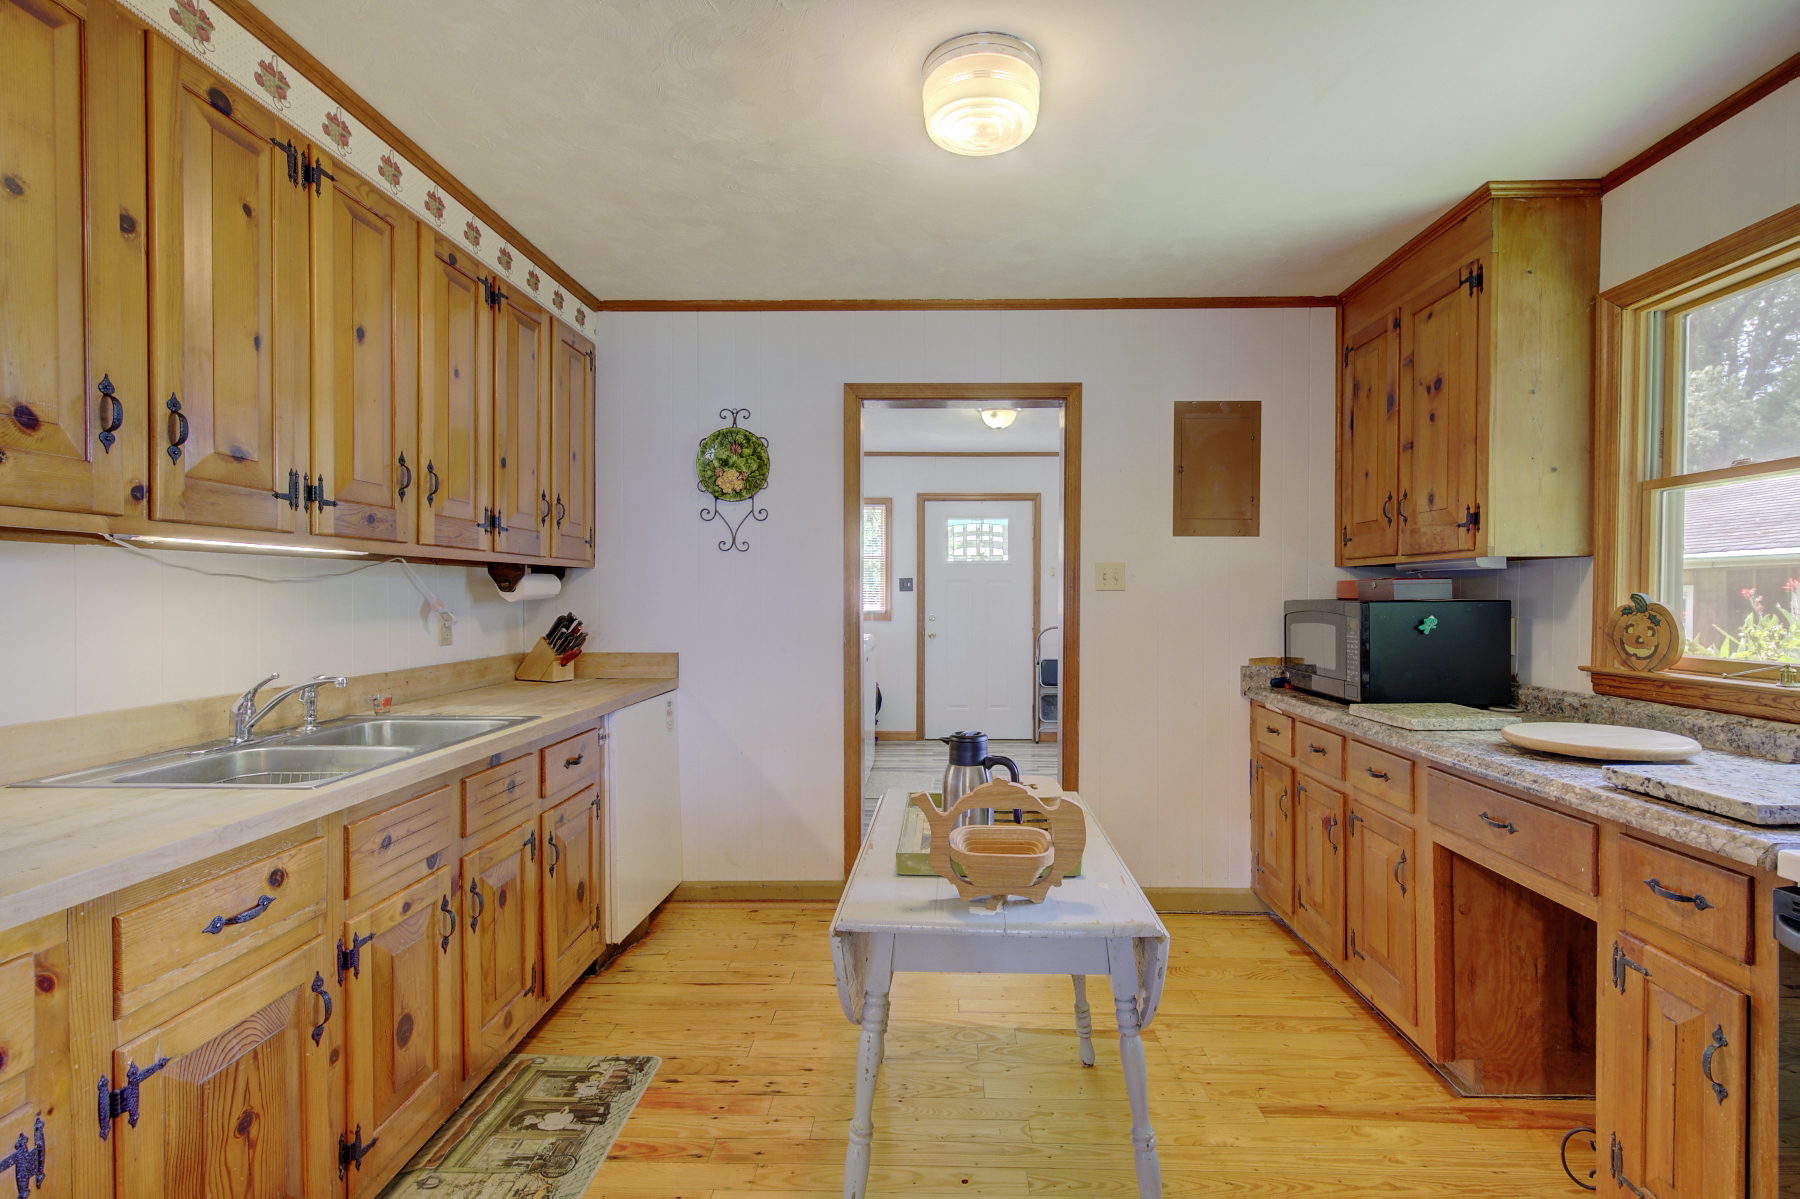 Original Knotty Pine cabinets and Hardwood floors in Kitchen